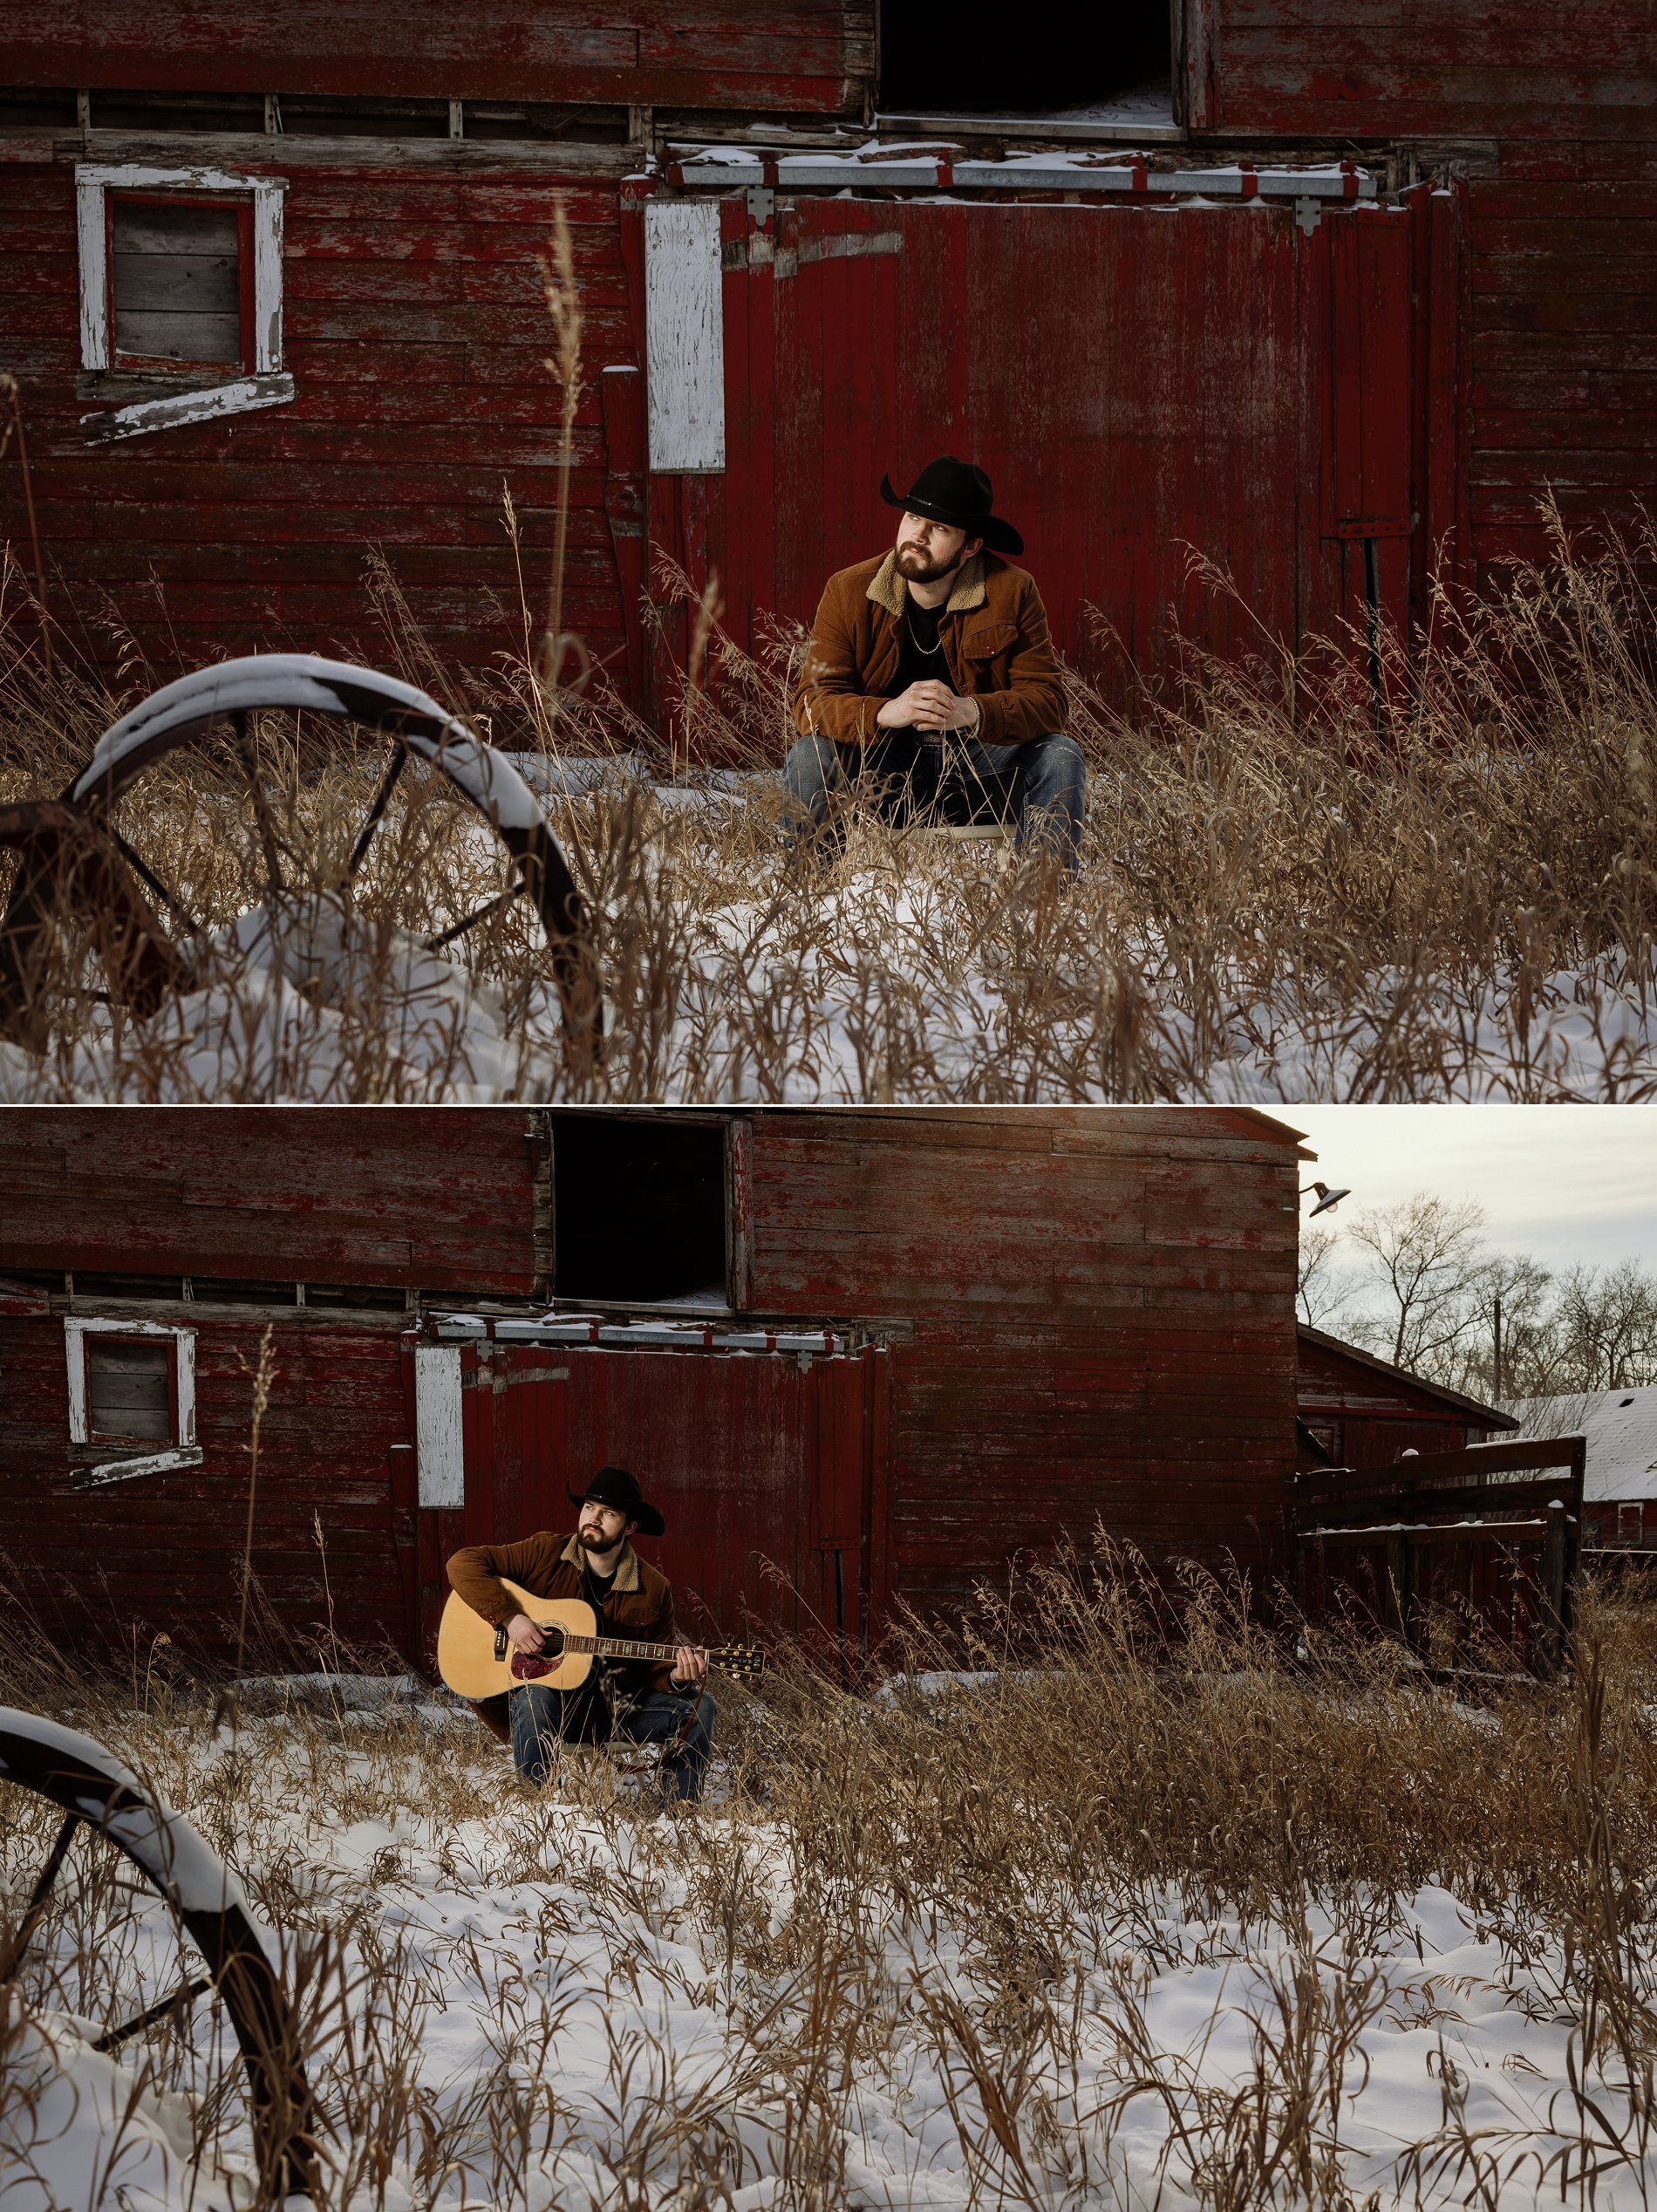 Country music singer Josh Stumpf sits in front of a red barn surrounded by grass, holding a guitar in his press photos.